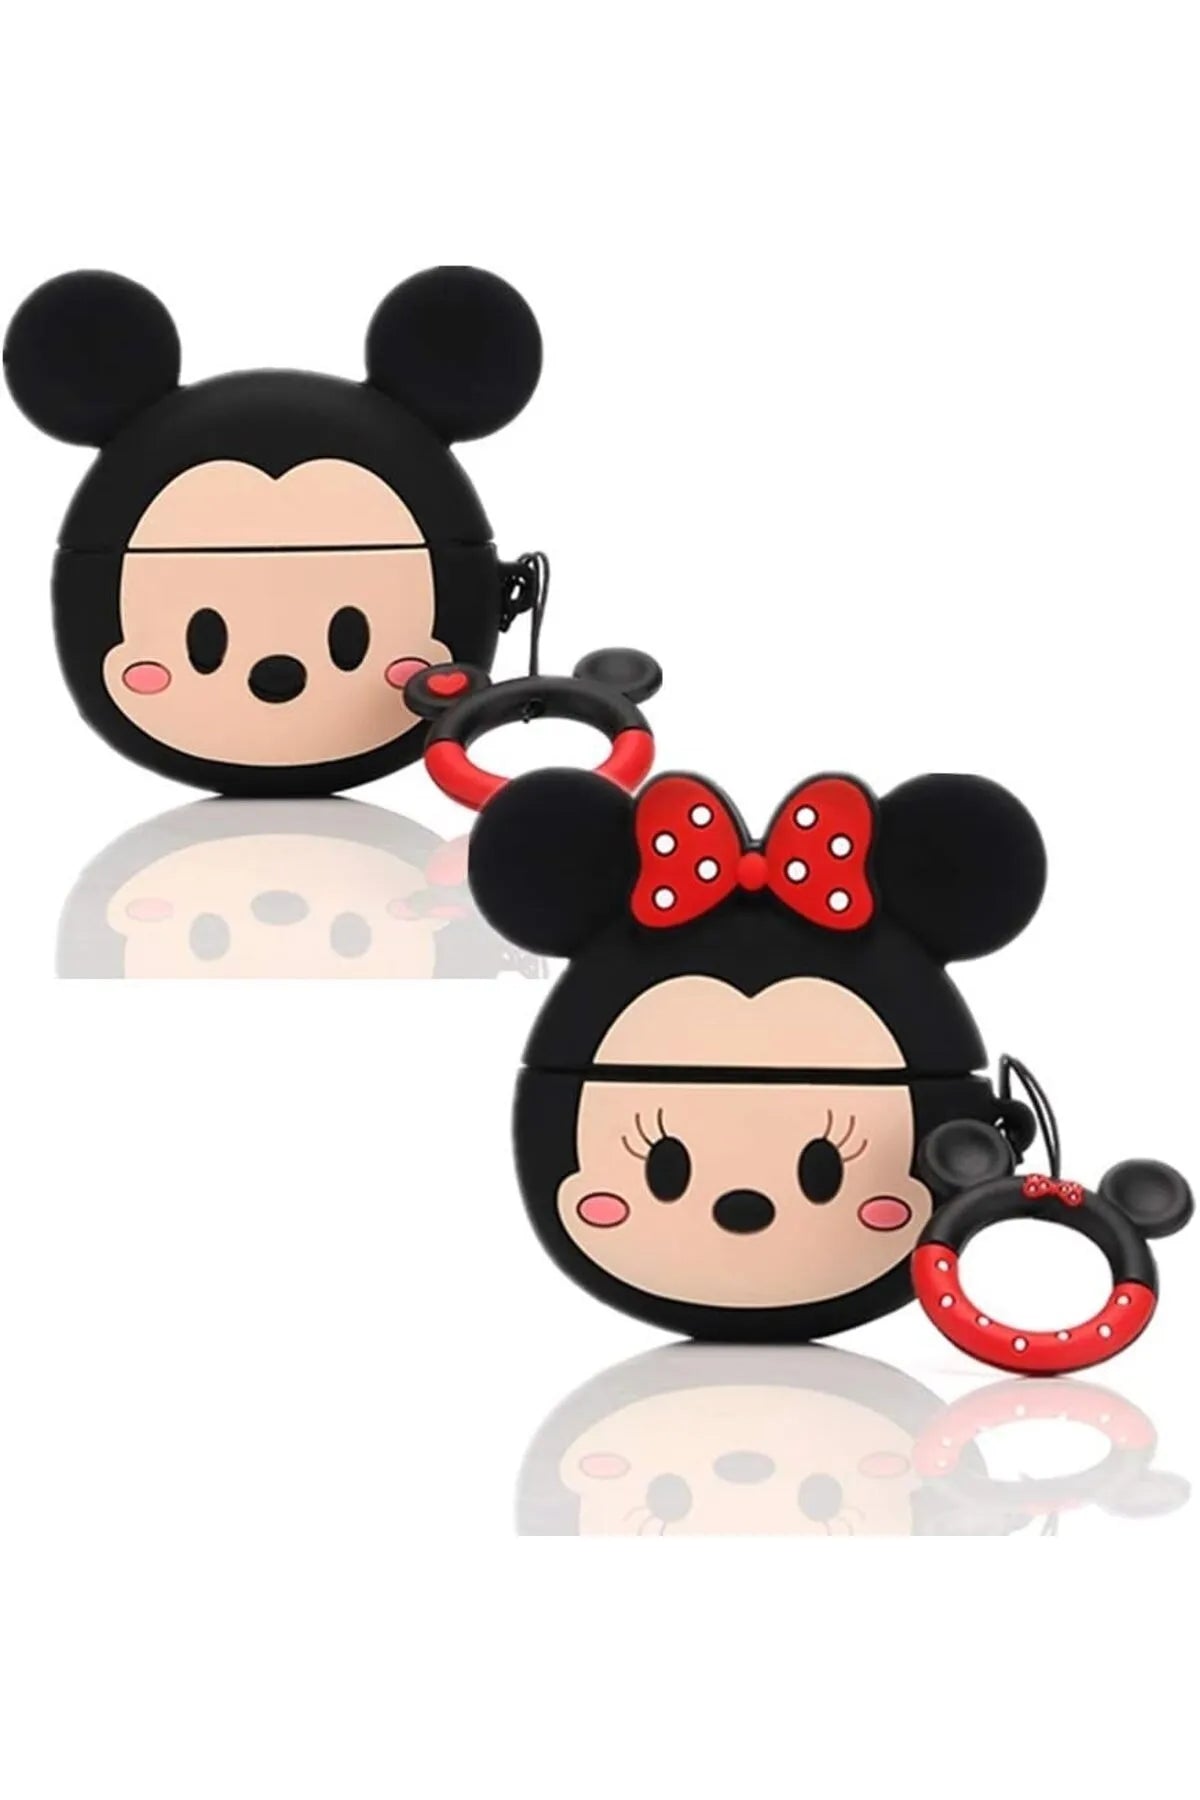 "3rd Generation Minnie Mouse AirPods Case - Cute Silicone Protective Cover with Keychain for Apple AirPods 3 (2021) - Multi-Color, Girls & Women's Accessories"